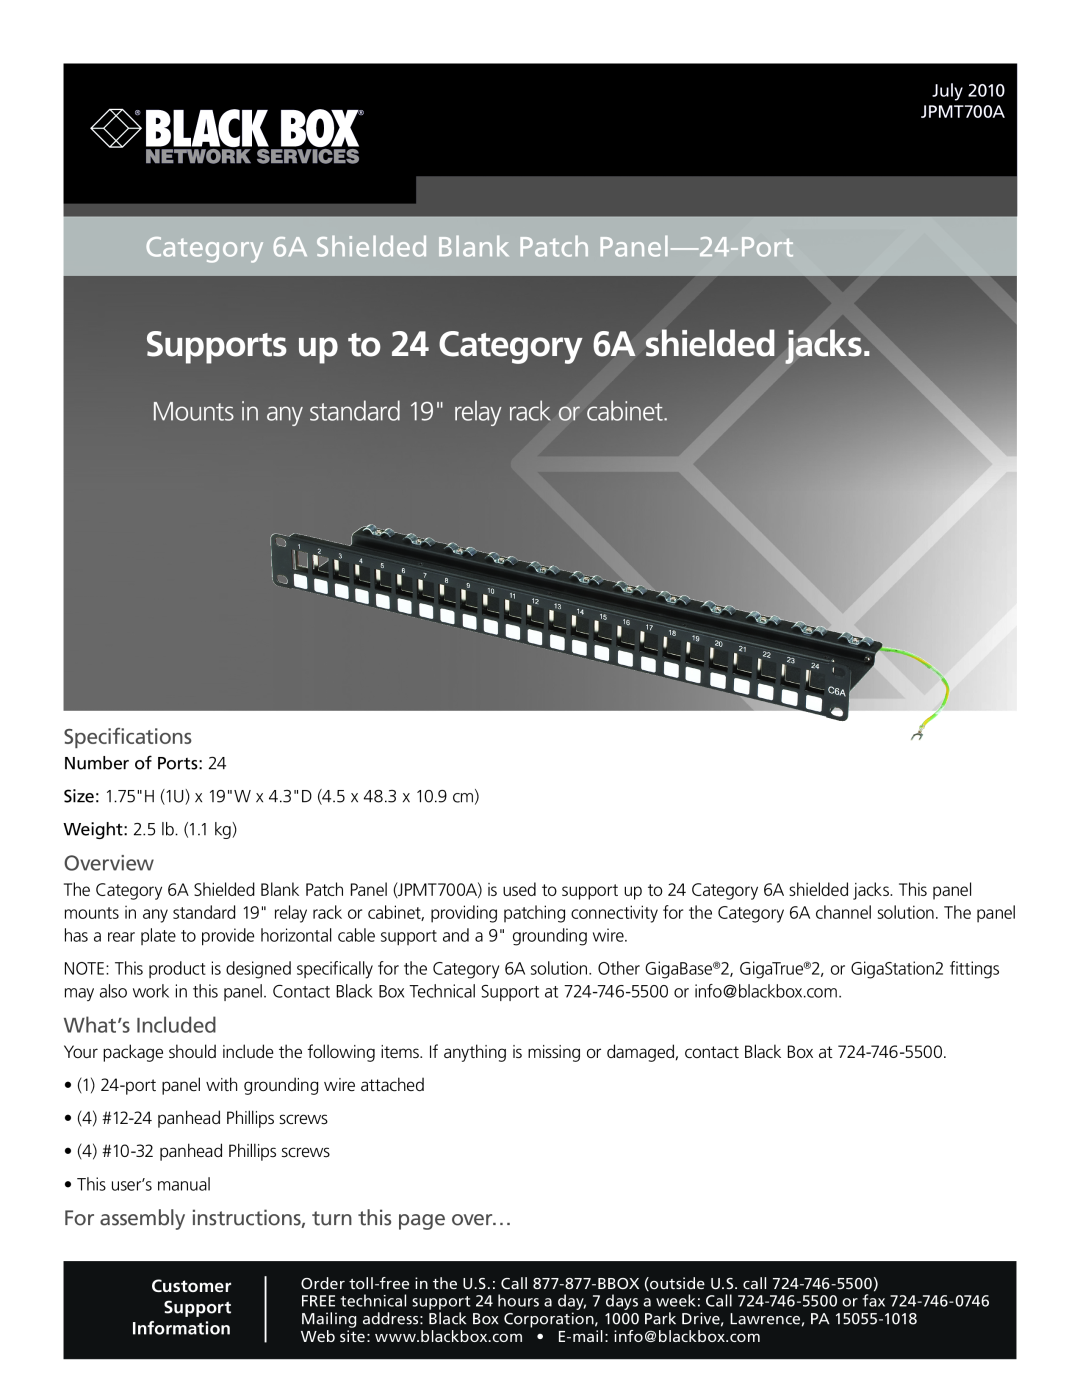 Black Box Category 6A Shielded Blank Patch Panel-24-Port specifications Specifications, Overview, What’s Included 